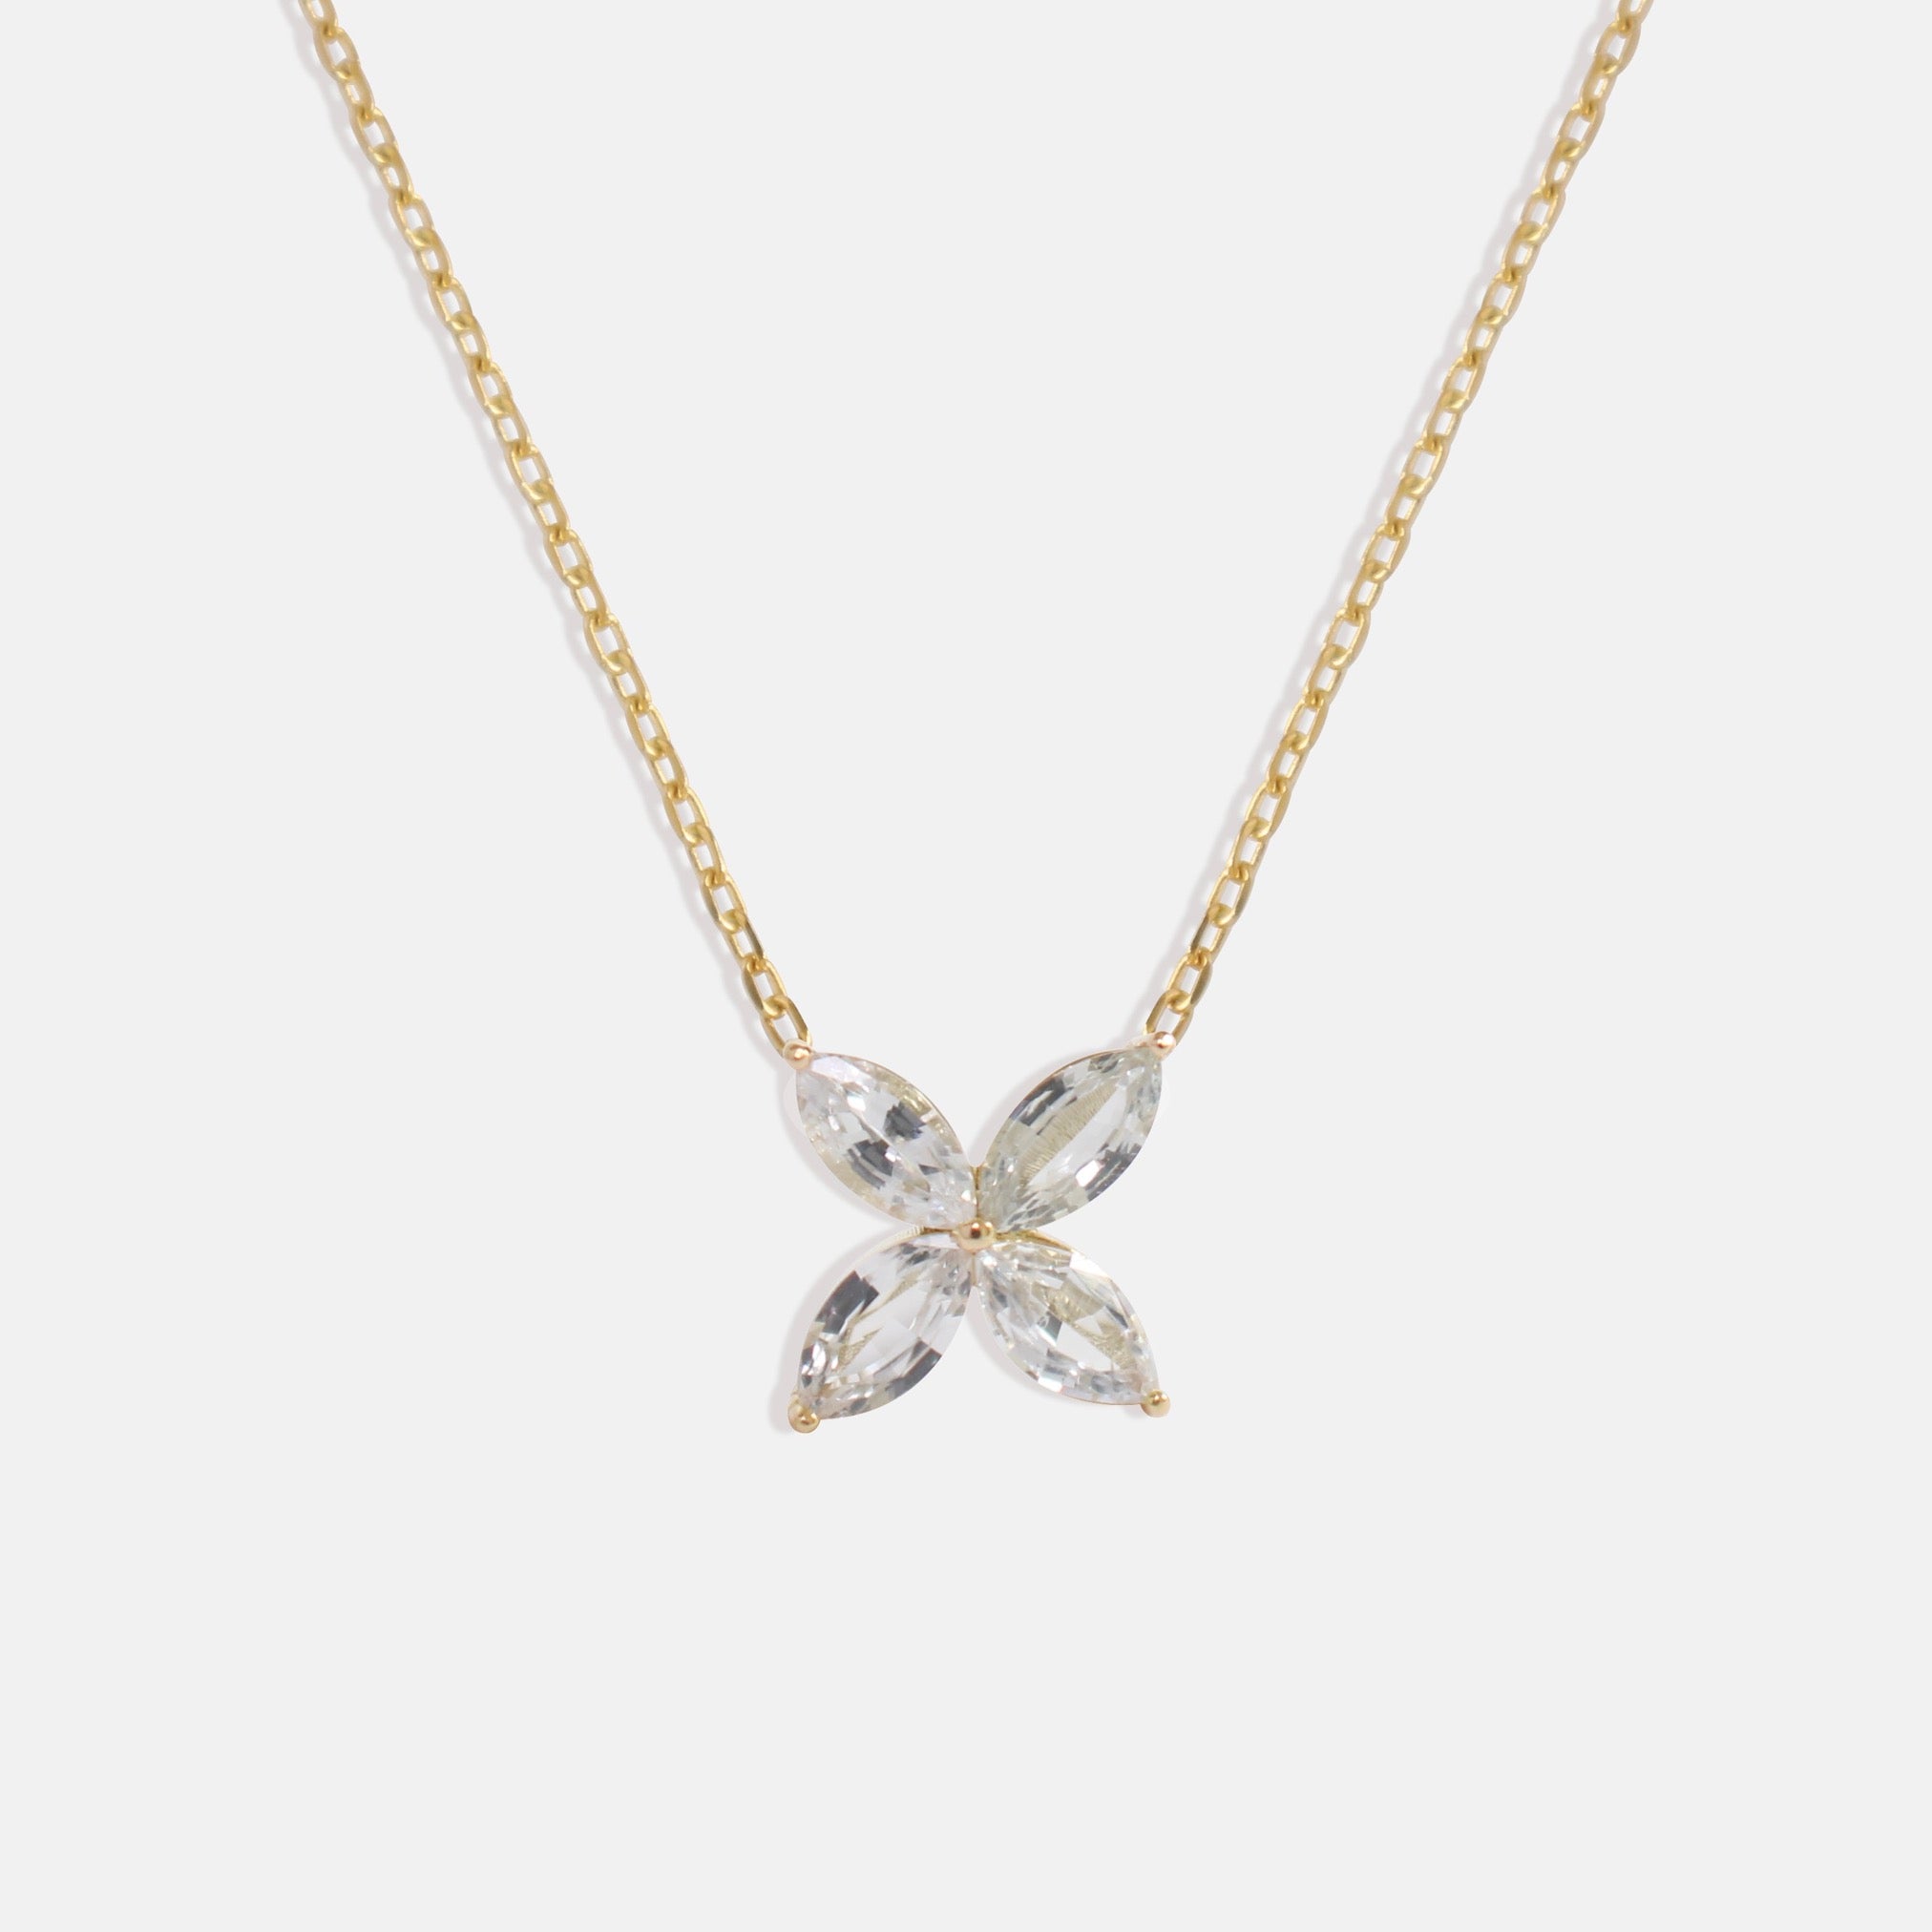 Toi et Moi 14k Yellow Gold Pendant Necklace in White Sapphire and White  Pearl | Kendra Scott